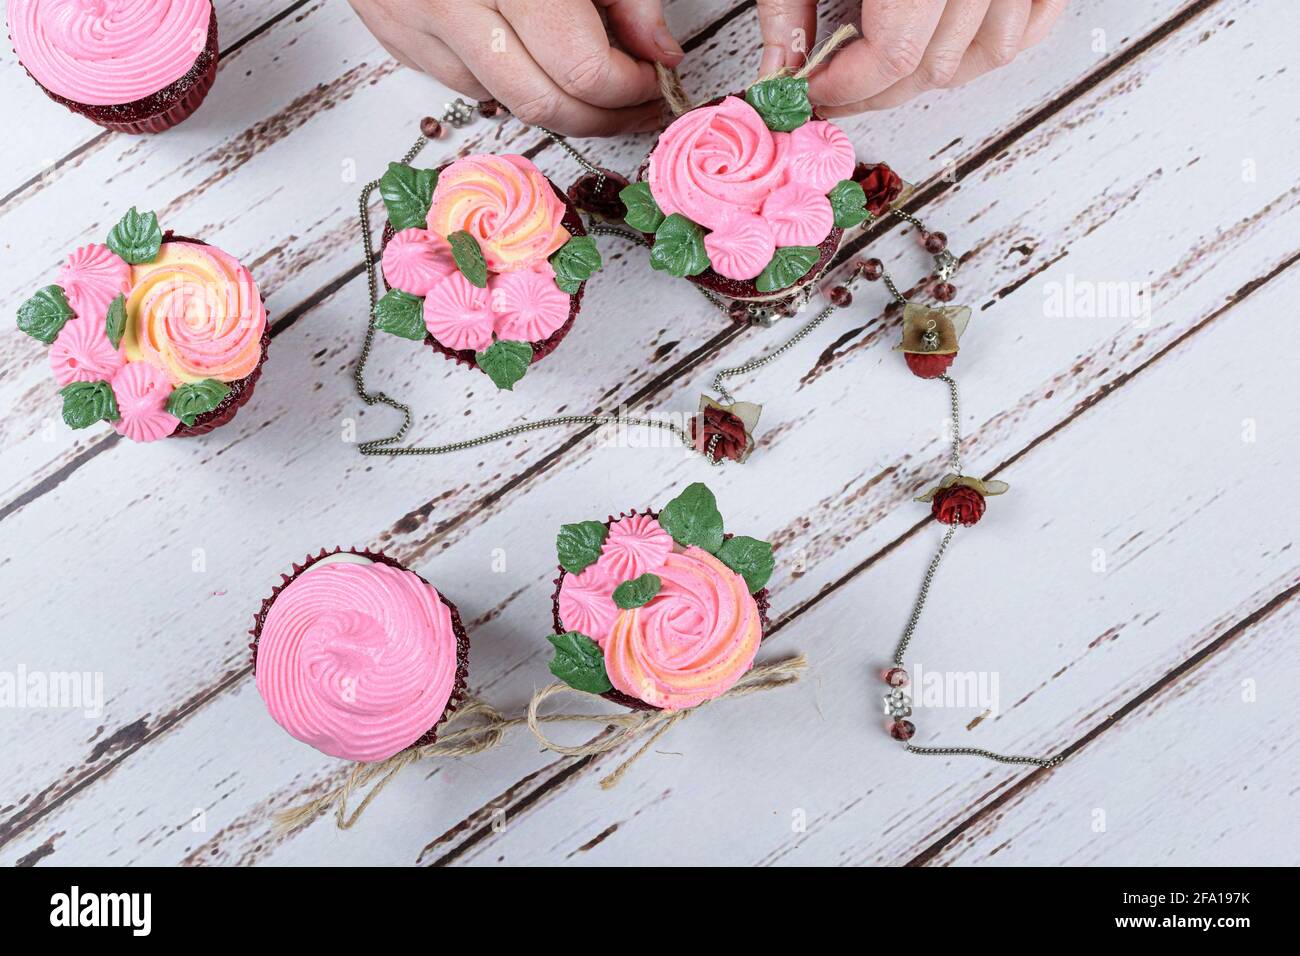 Red velvet cupcakes decorated with sisal lace, surrounded by a female necklace. Confectioner decorating a cupcake (top view). Stock Photo